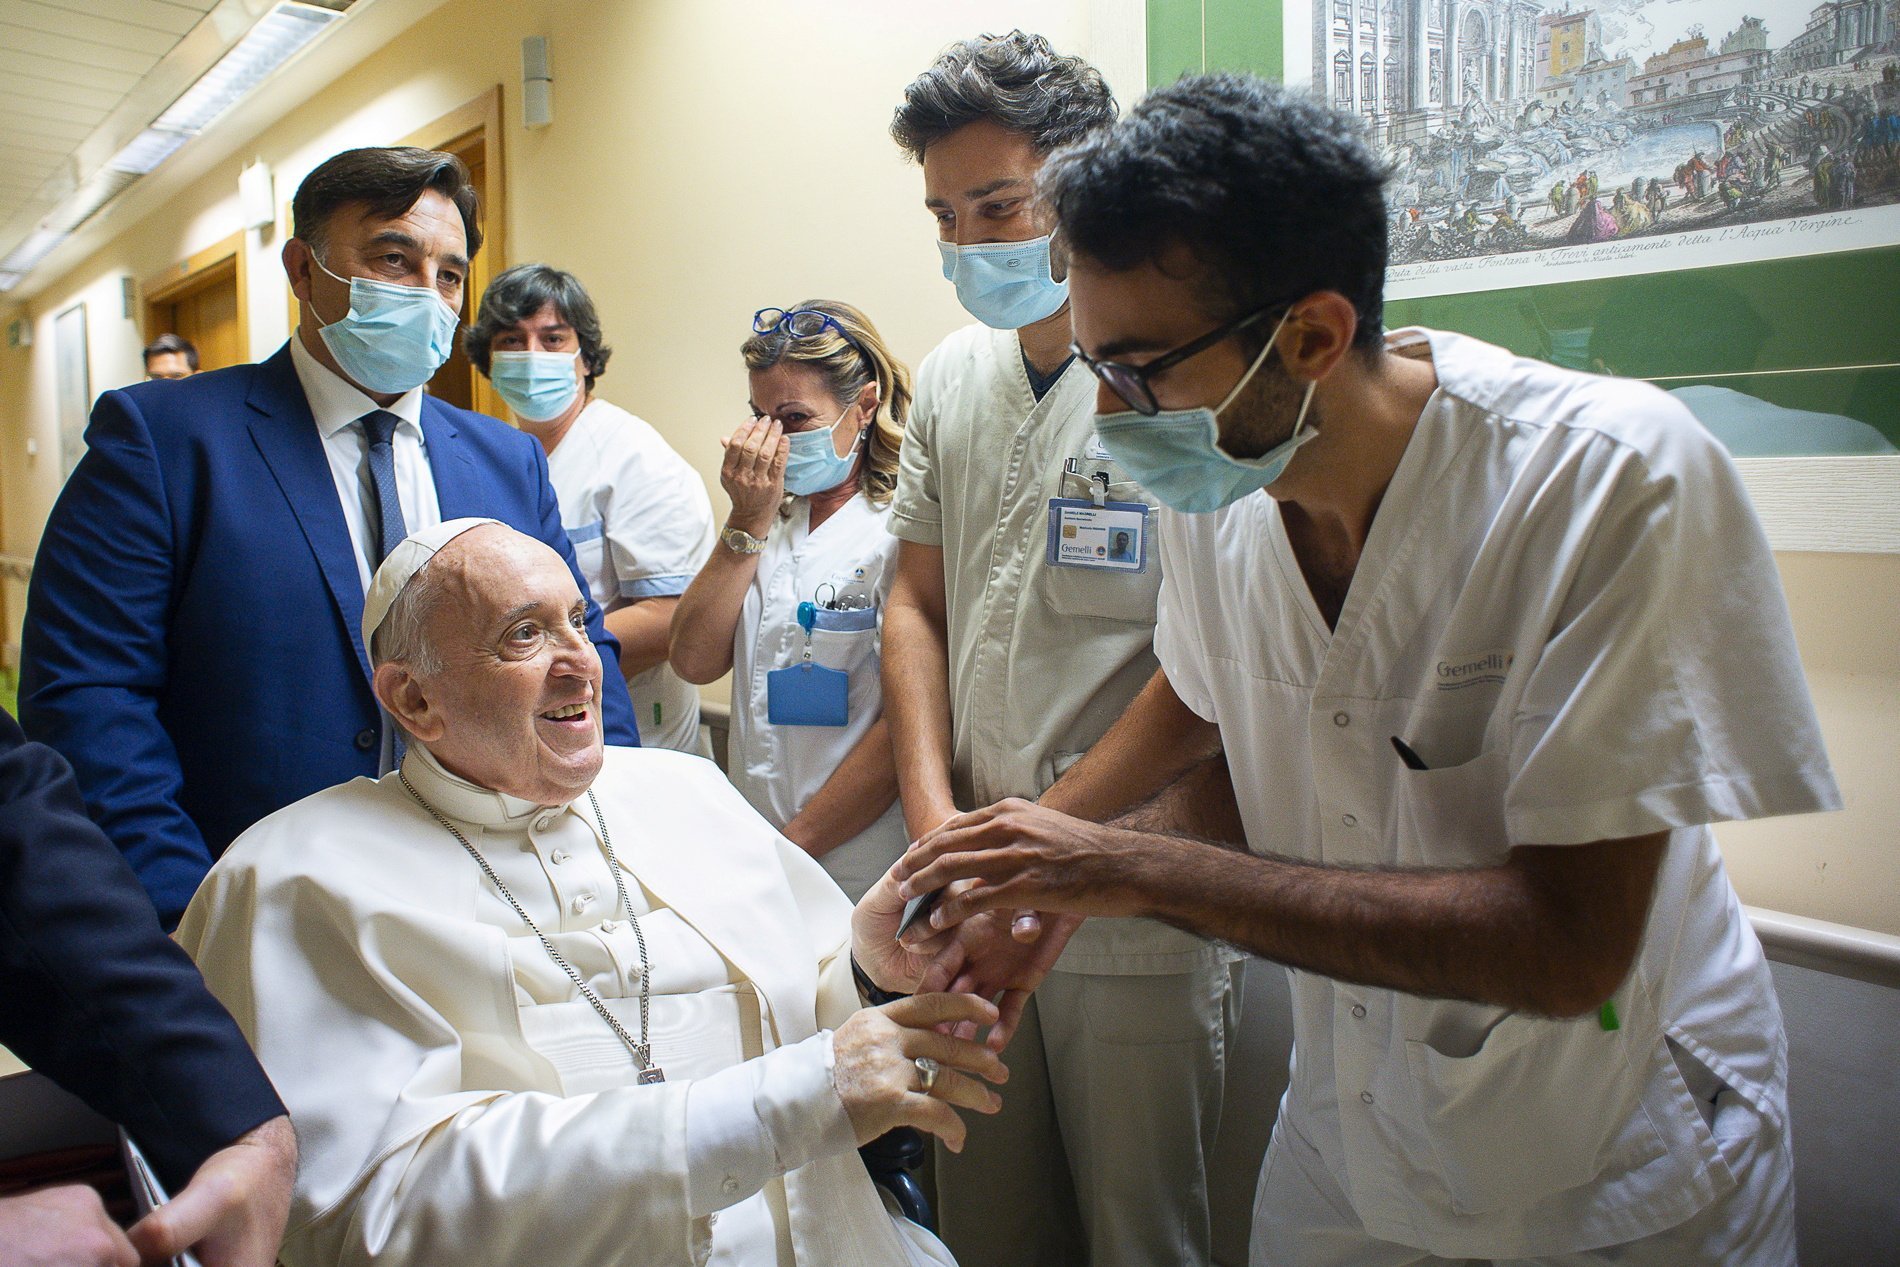 Pope Francis gives a rosary to a member of the medical staff at Gemelli hospital in Rome July 11, 2021, as he recovers following scheduled colon surgery. The pope expressed his gratitude for "making me feel at home" while he recovered from surgery, in a J